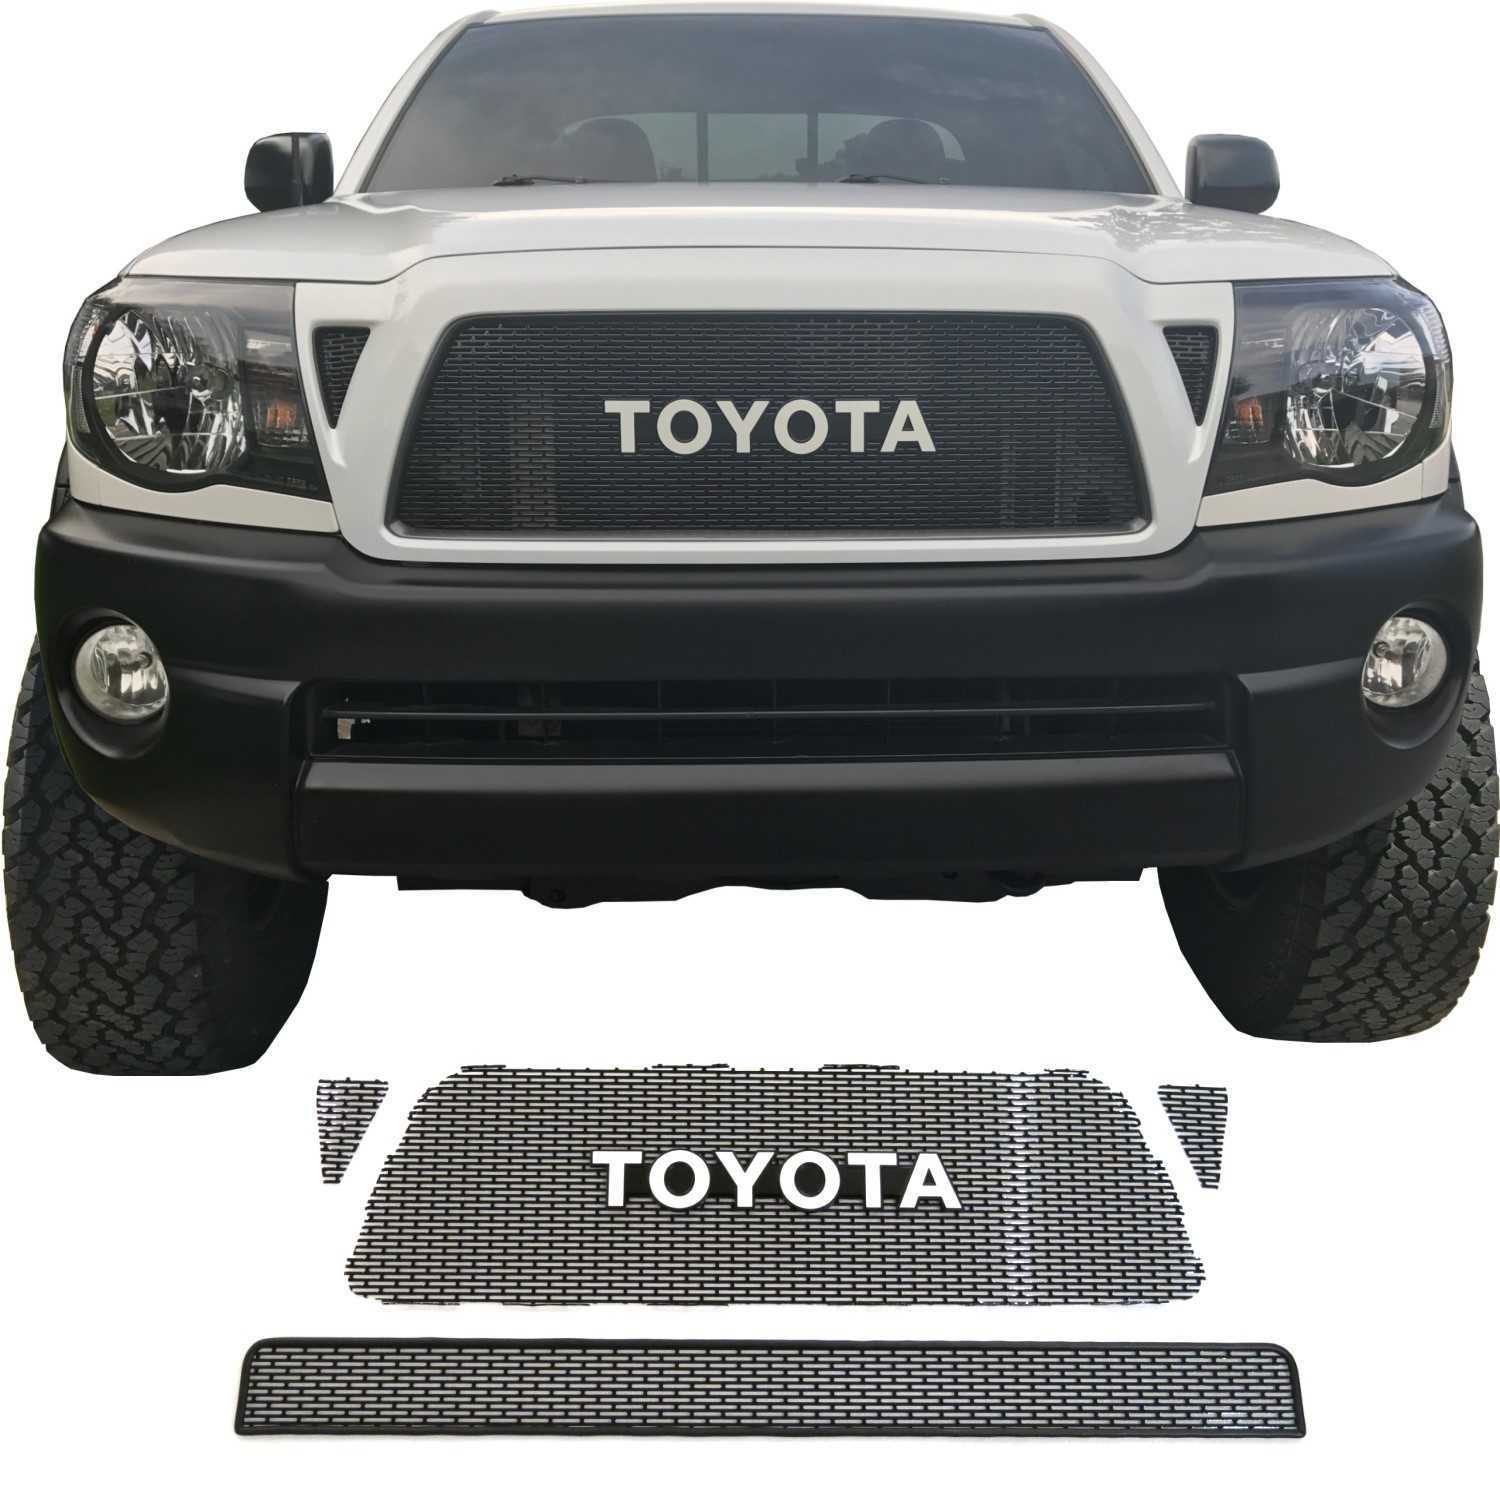 2005-11 Toyota Tacoma Mesh Grill Builder by customcargrills